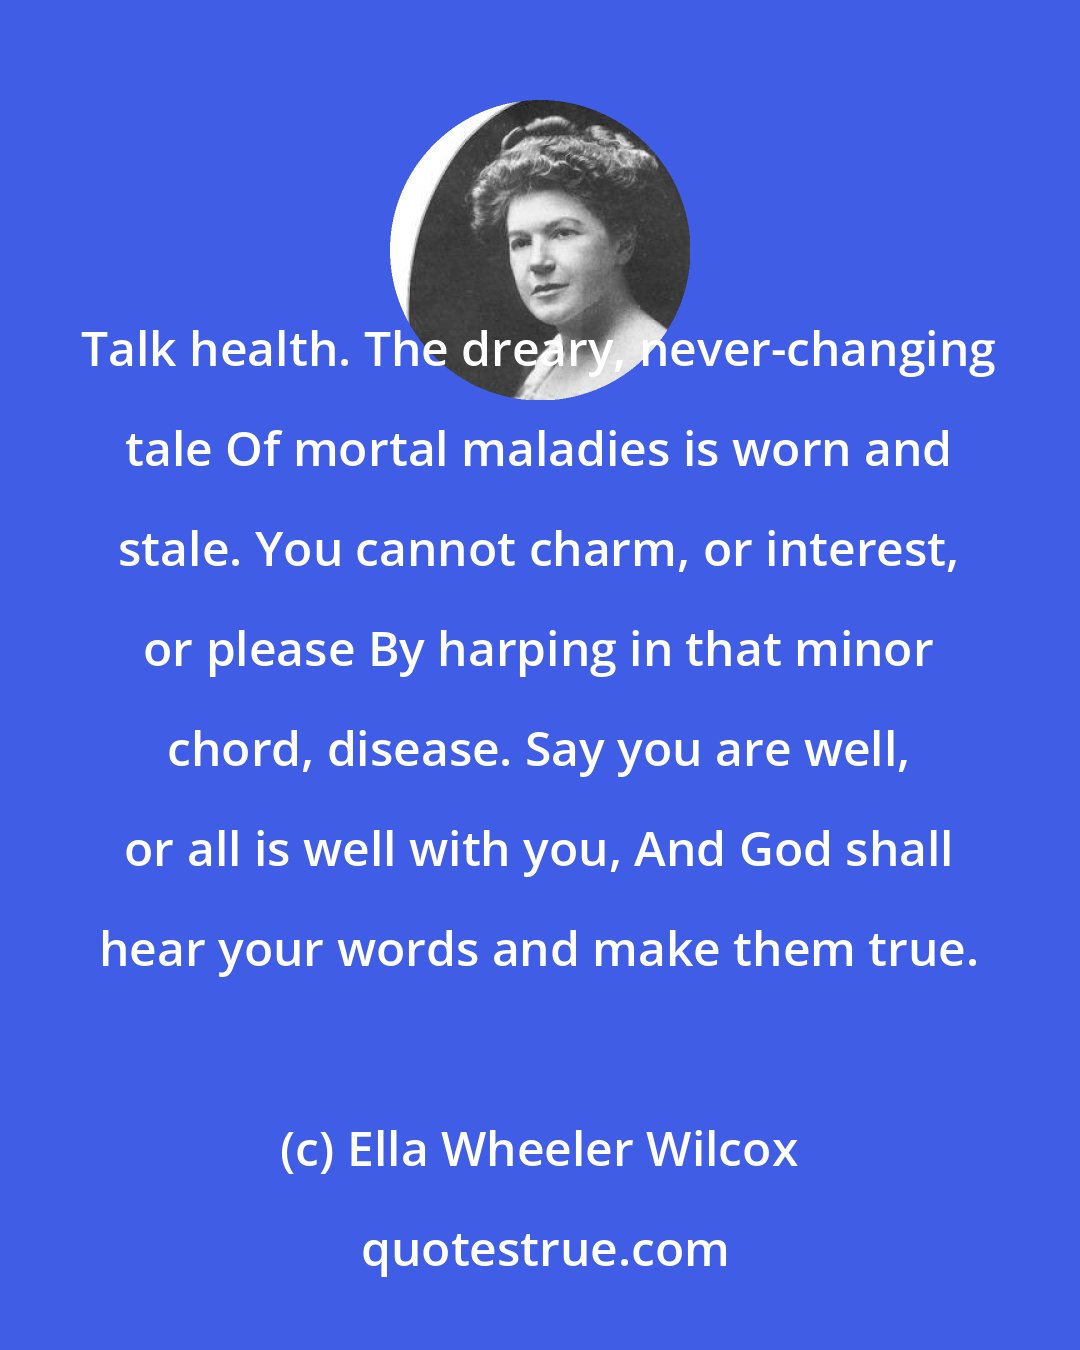 Ella Wheeler Wilcox: Talk health. The dreary, never-changing tale Of mortal maladies is worn and stale. You cannot charm, or interest, or please By harping in that minor chord, disease. Say you are well, or all is well with you, And God shall hear your words and make them true.